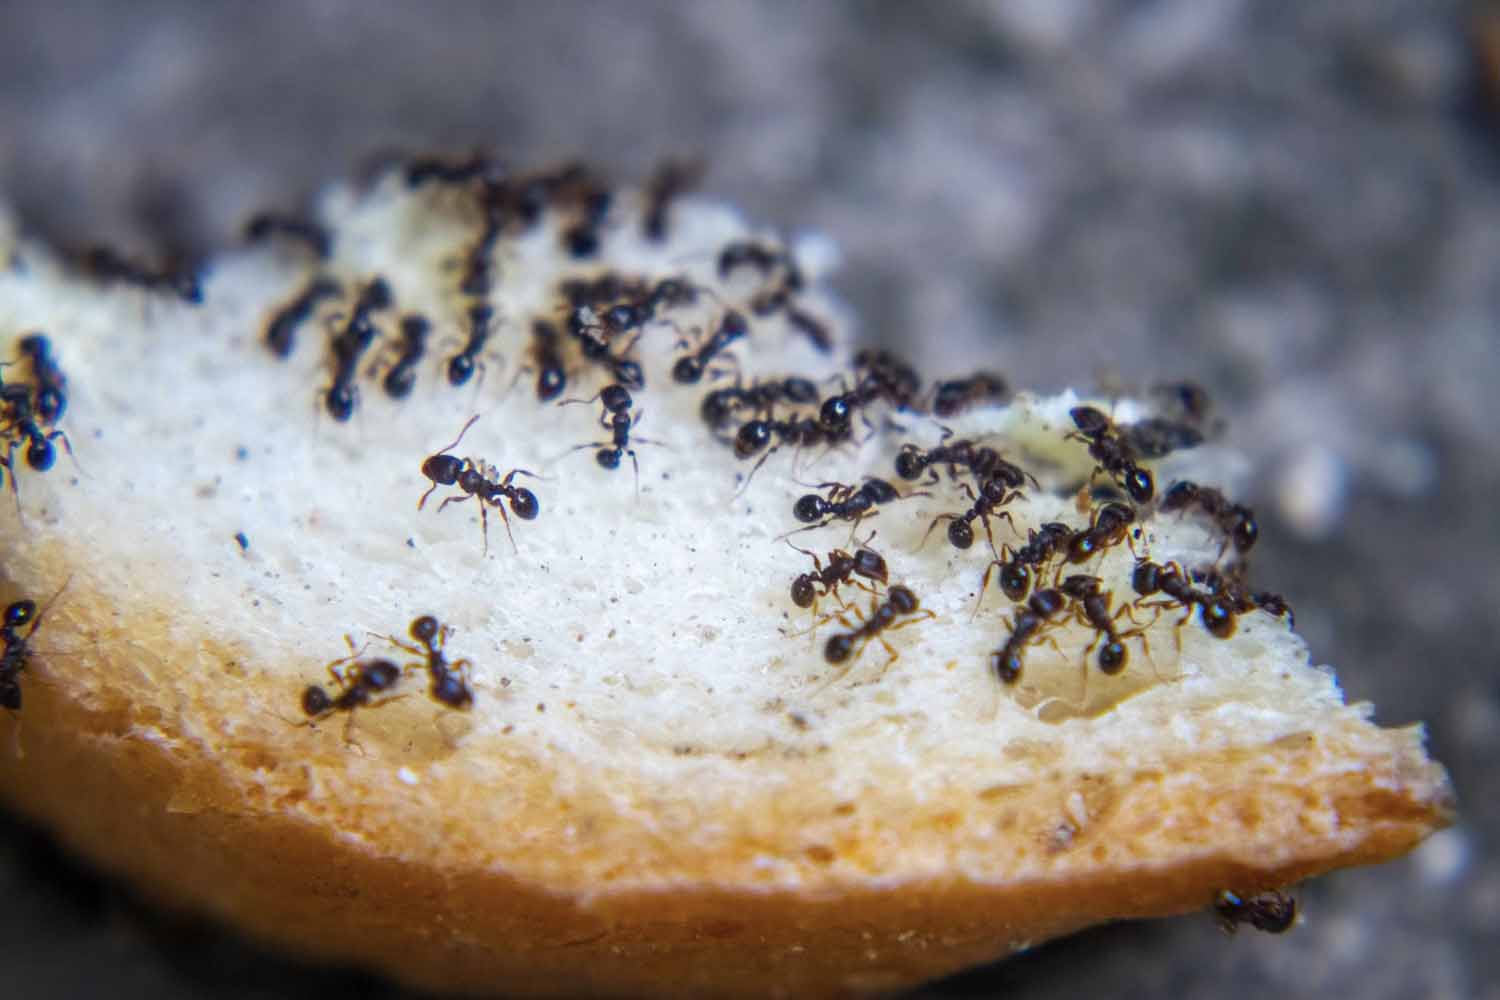 closeup of ants eating fresh baked bread